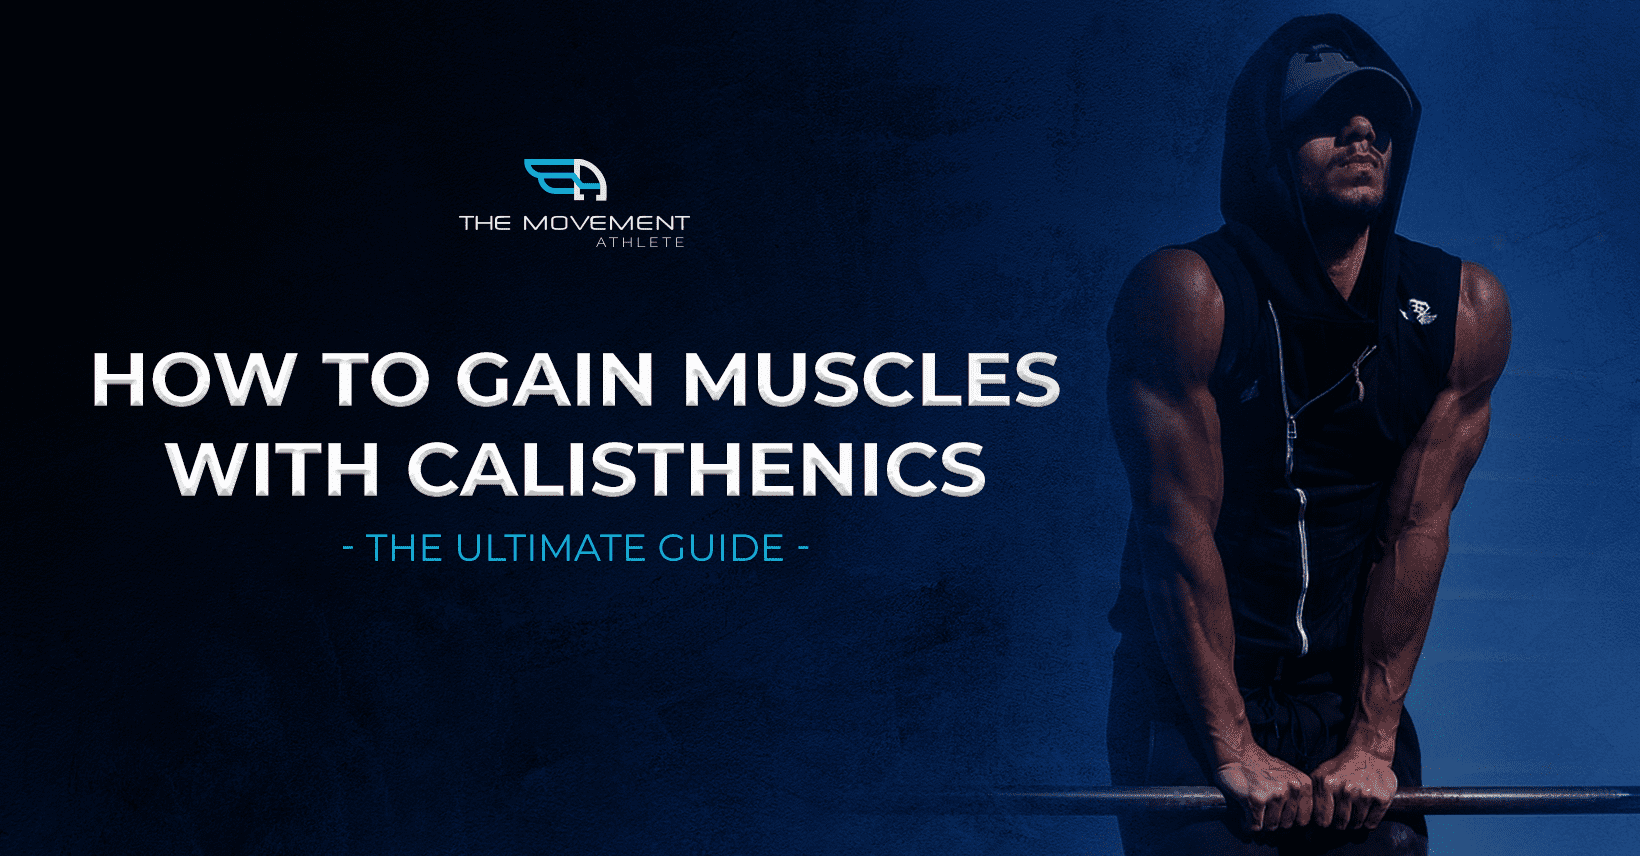 How to Build Muscle Mass Calisthenics with Bodyweight